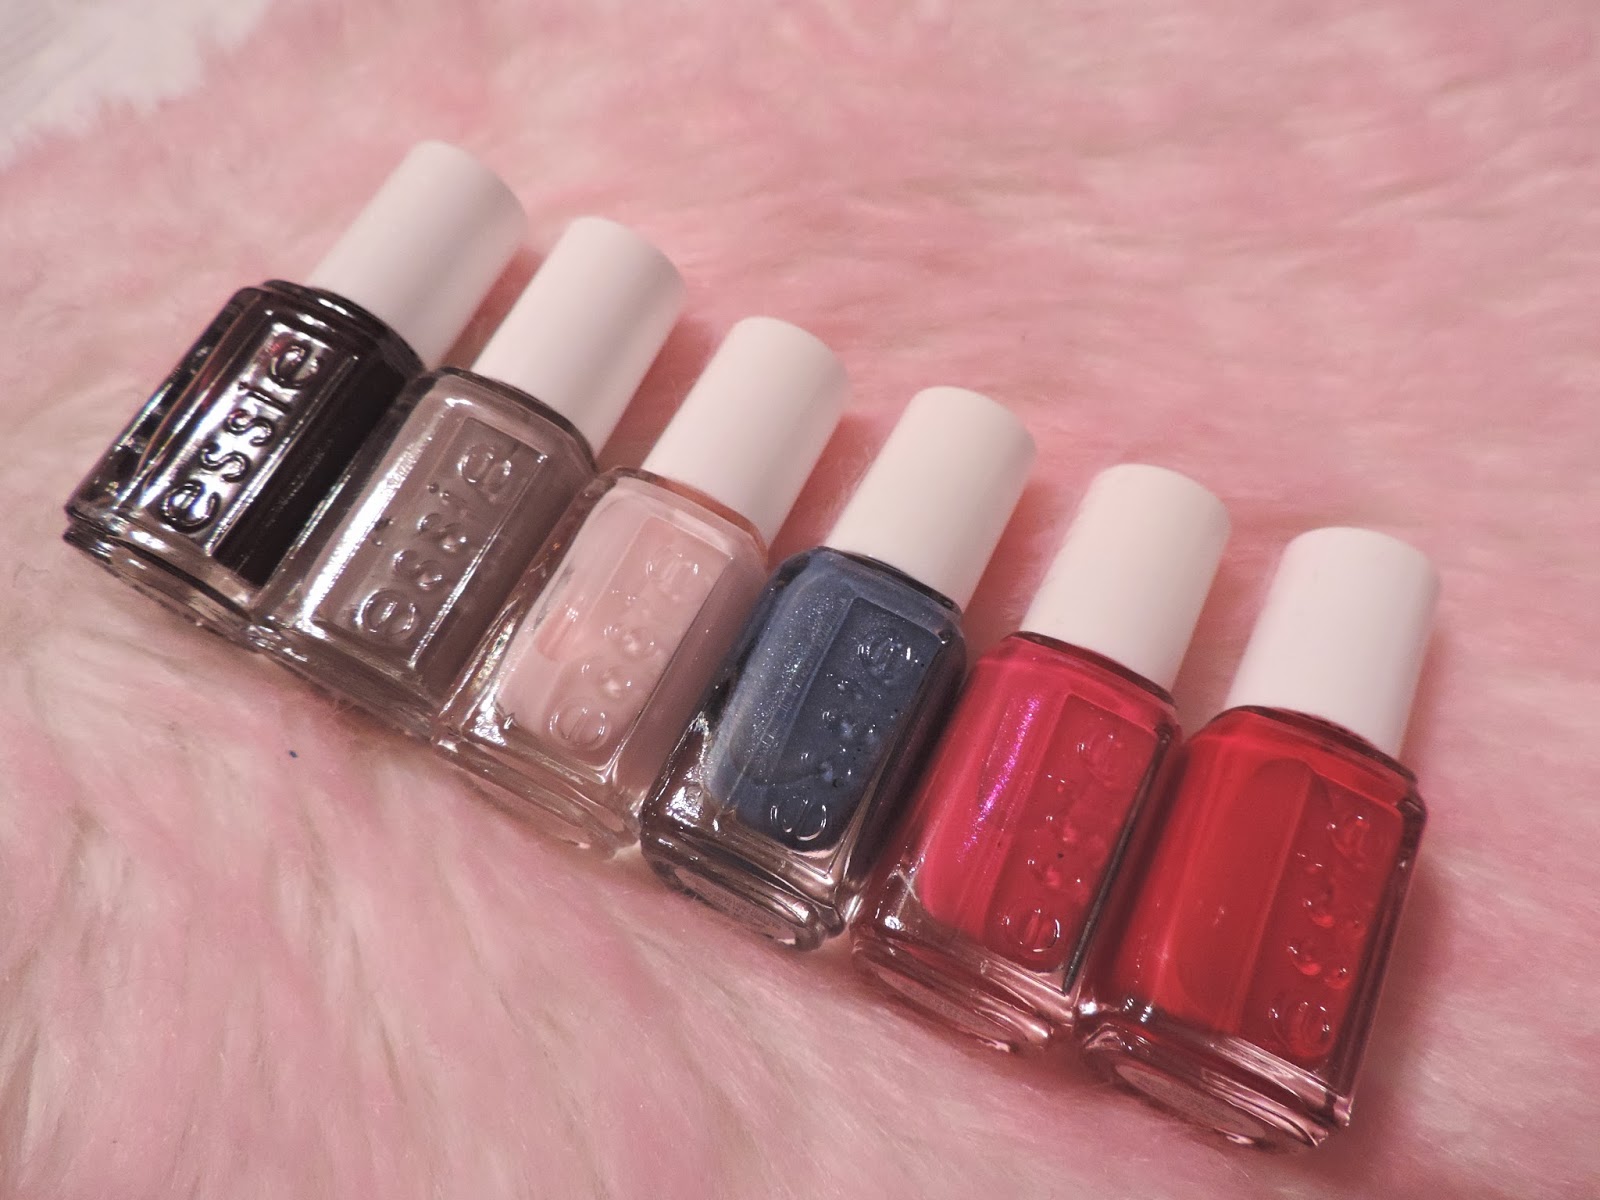 3. "Yes Please" Nail Polish Dupes - wide 6